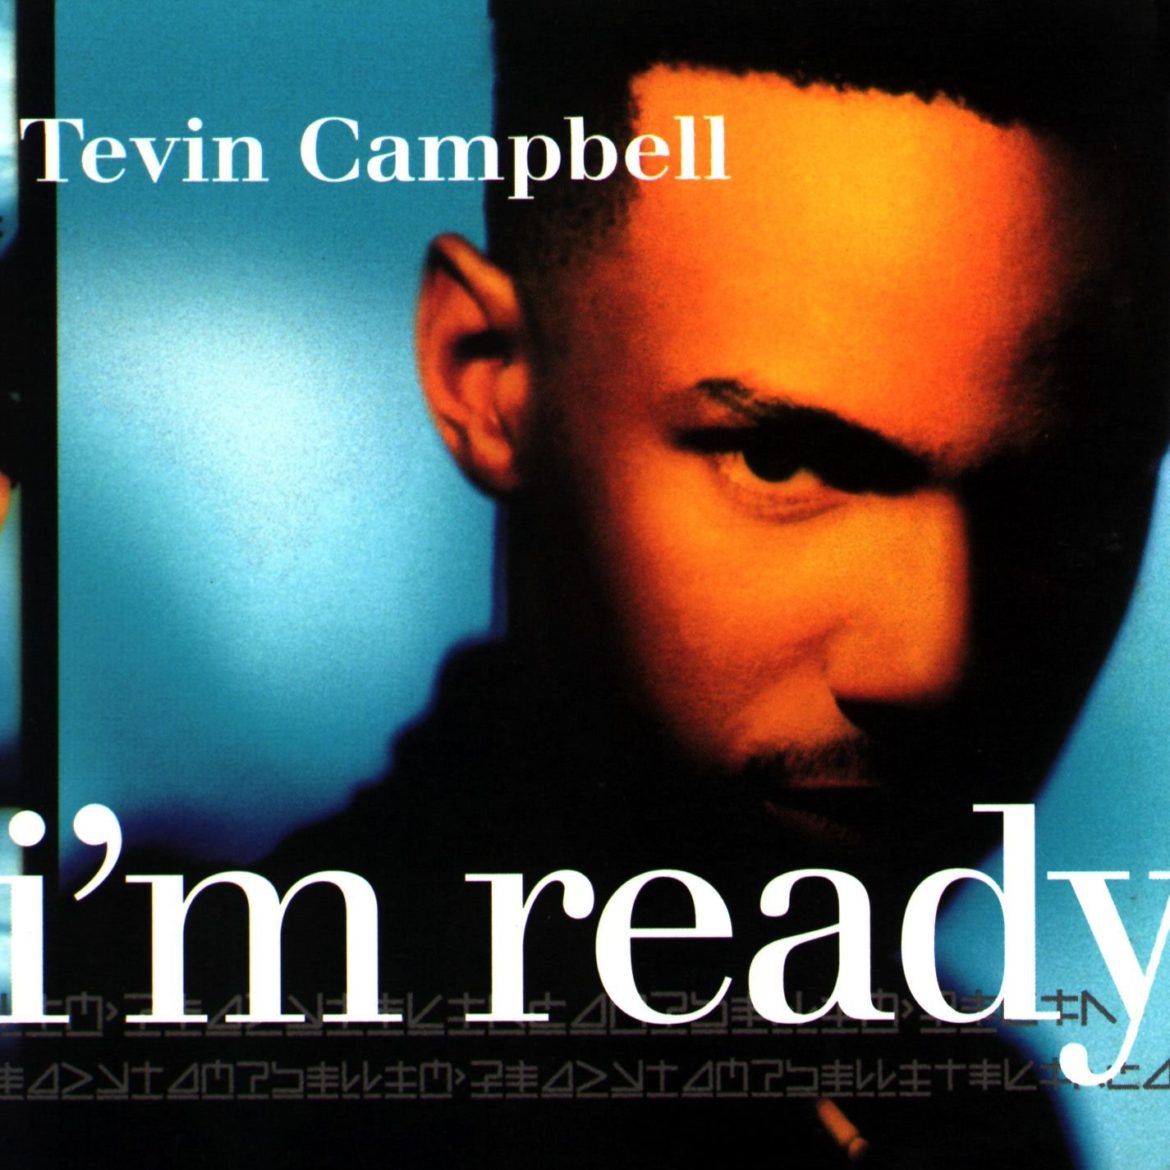 Tevin Campbell’s “I’m Ready” Turns 27